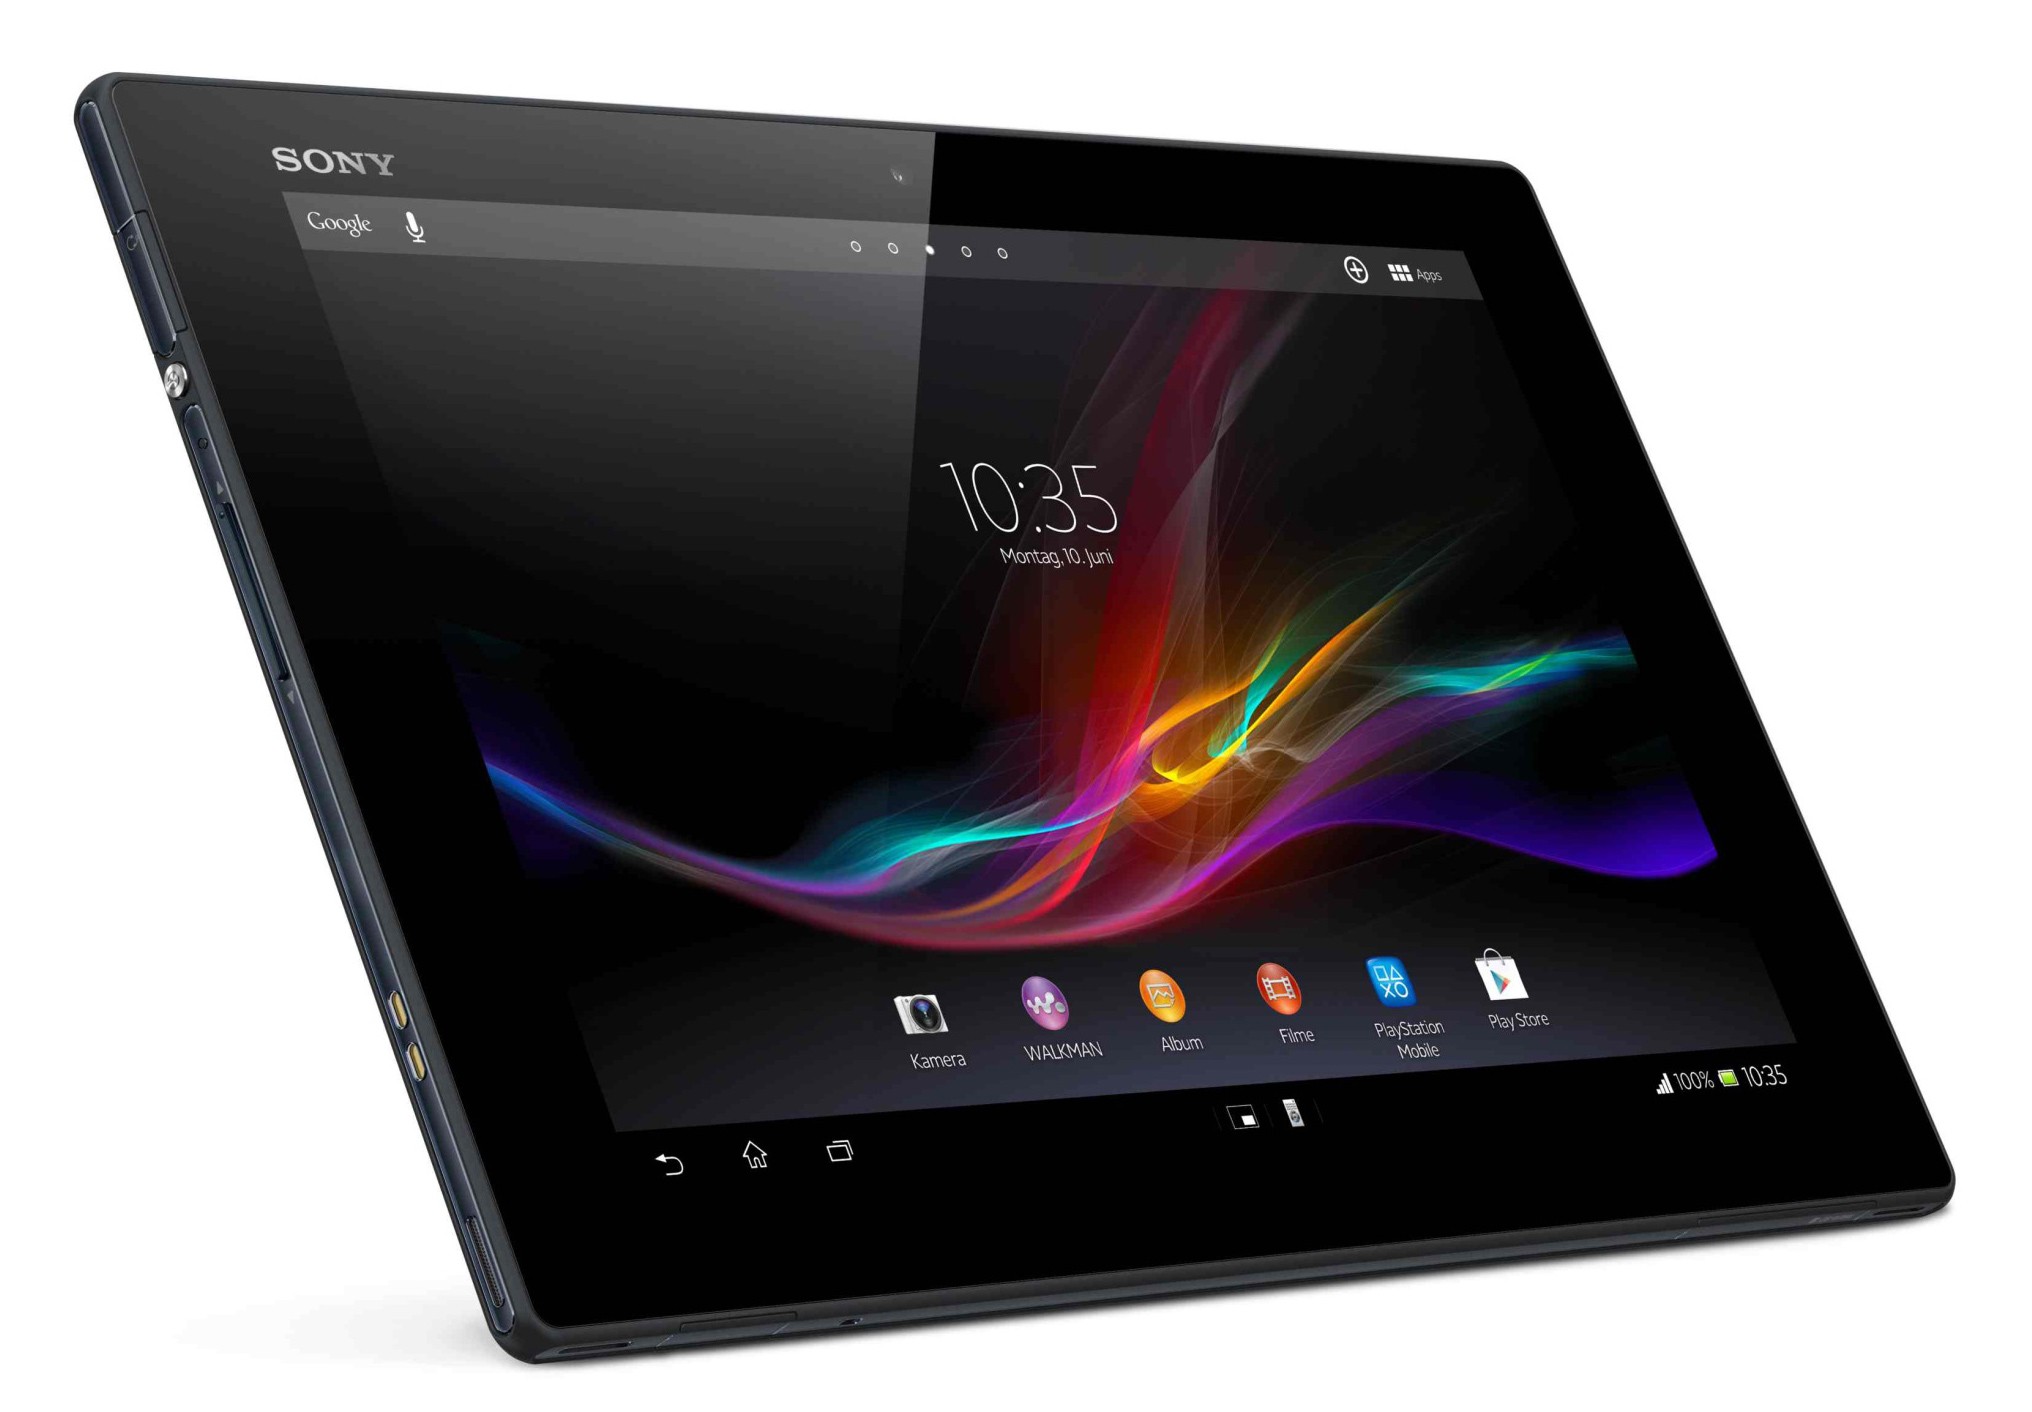 Sony Xperia Z4 Tablet launched at MWC 2015 2